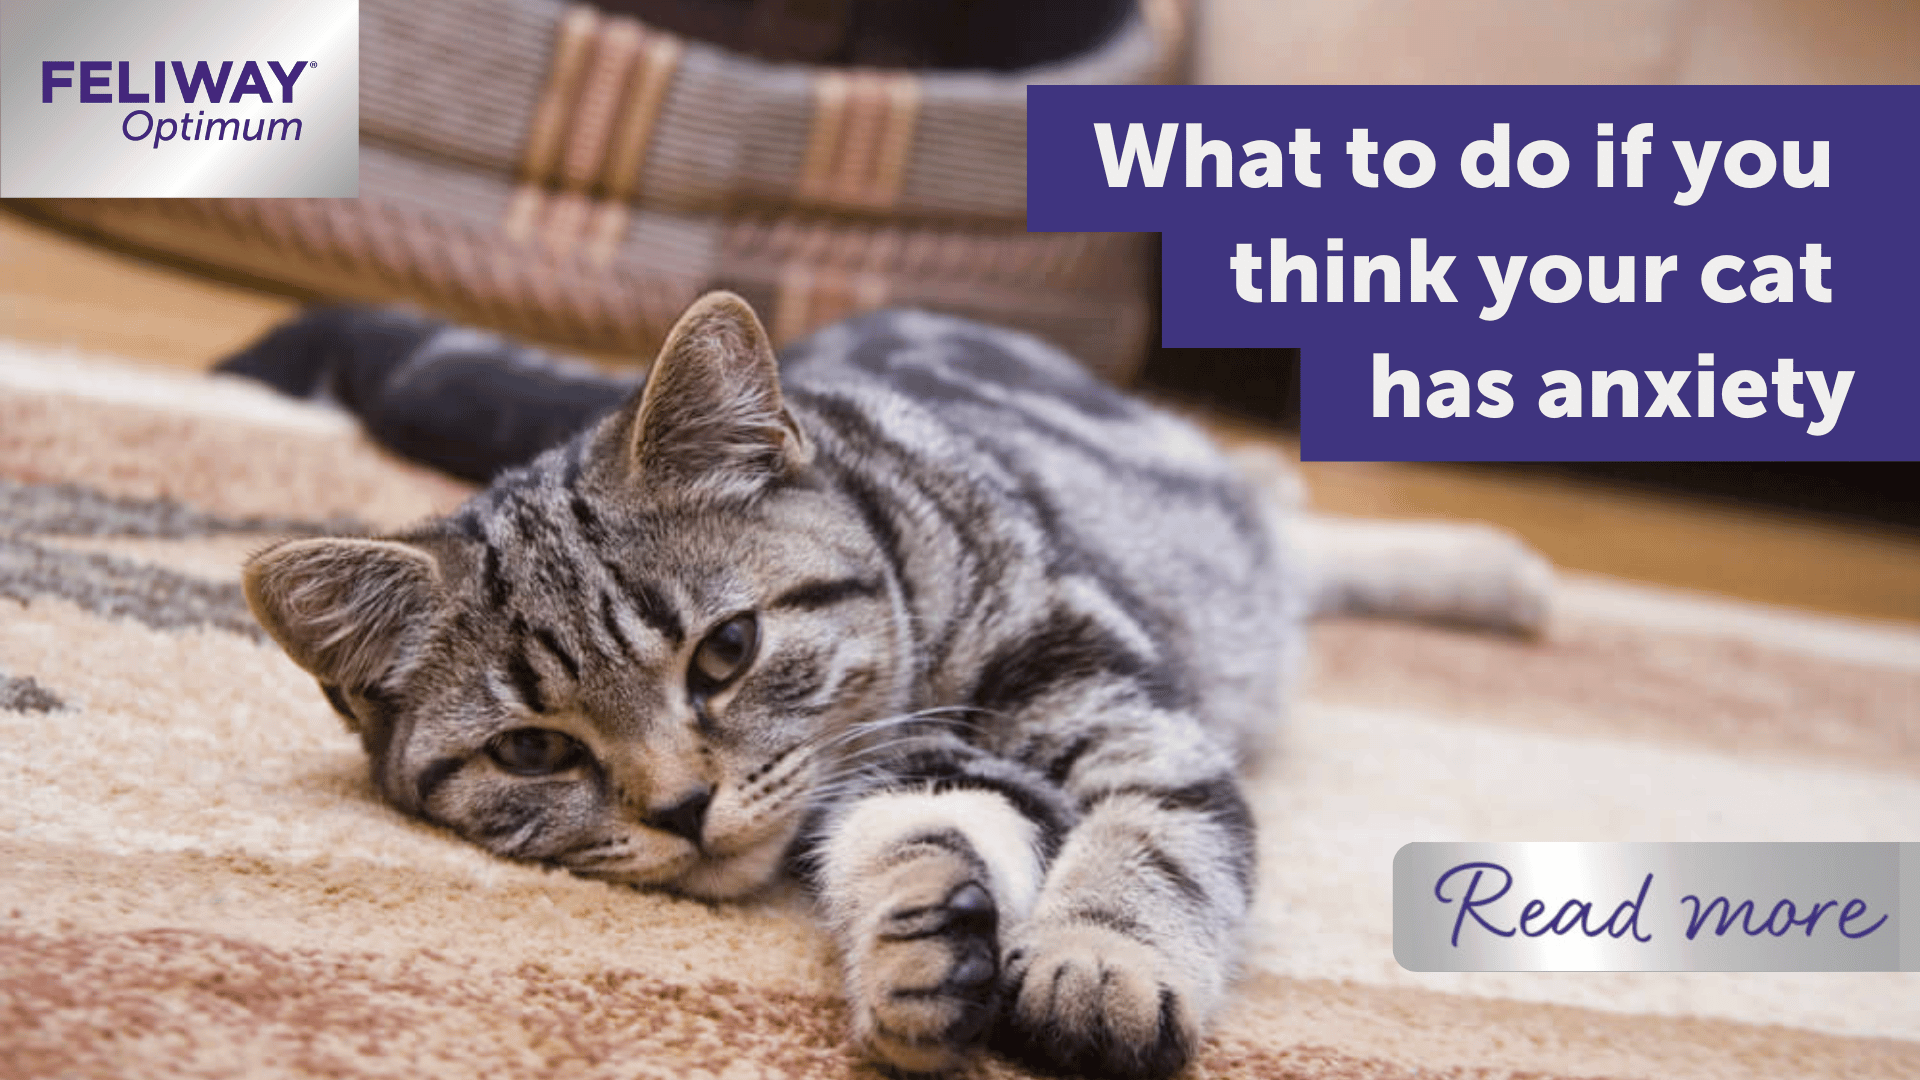 What to do if you think your cat has anxiety